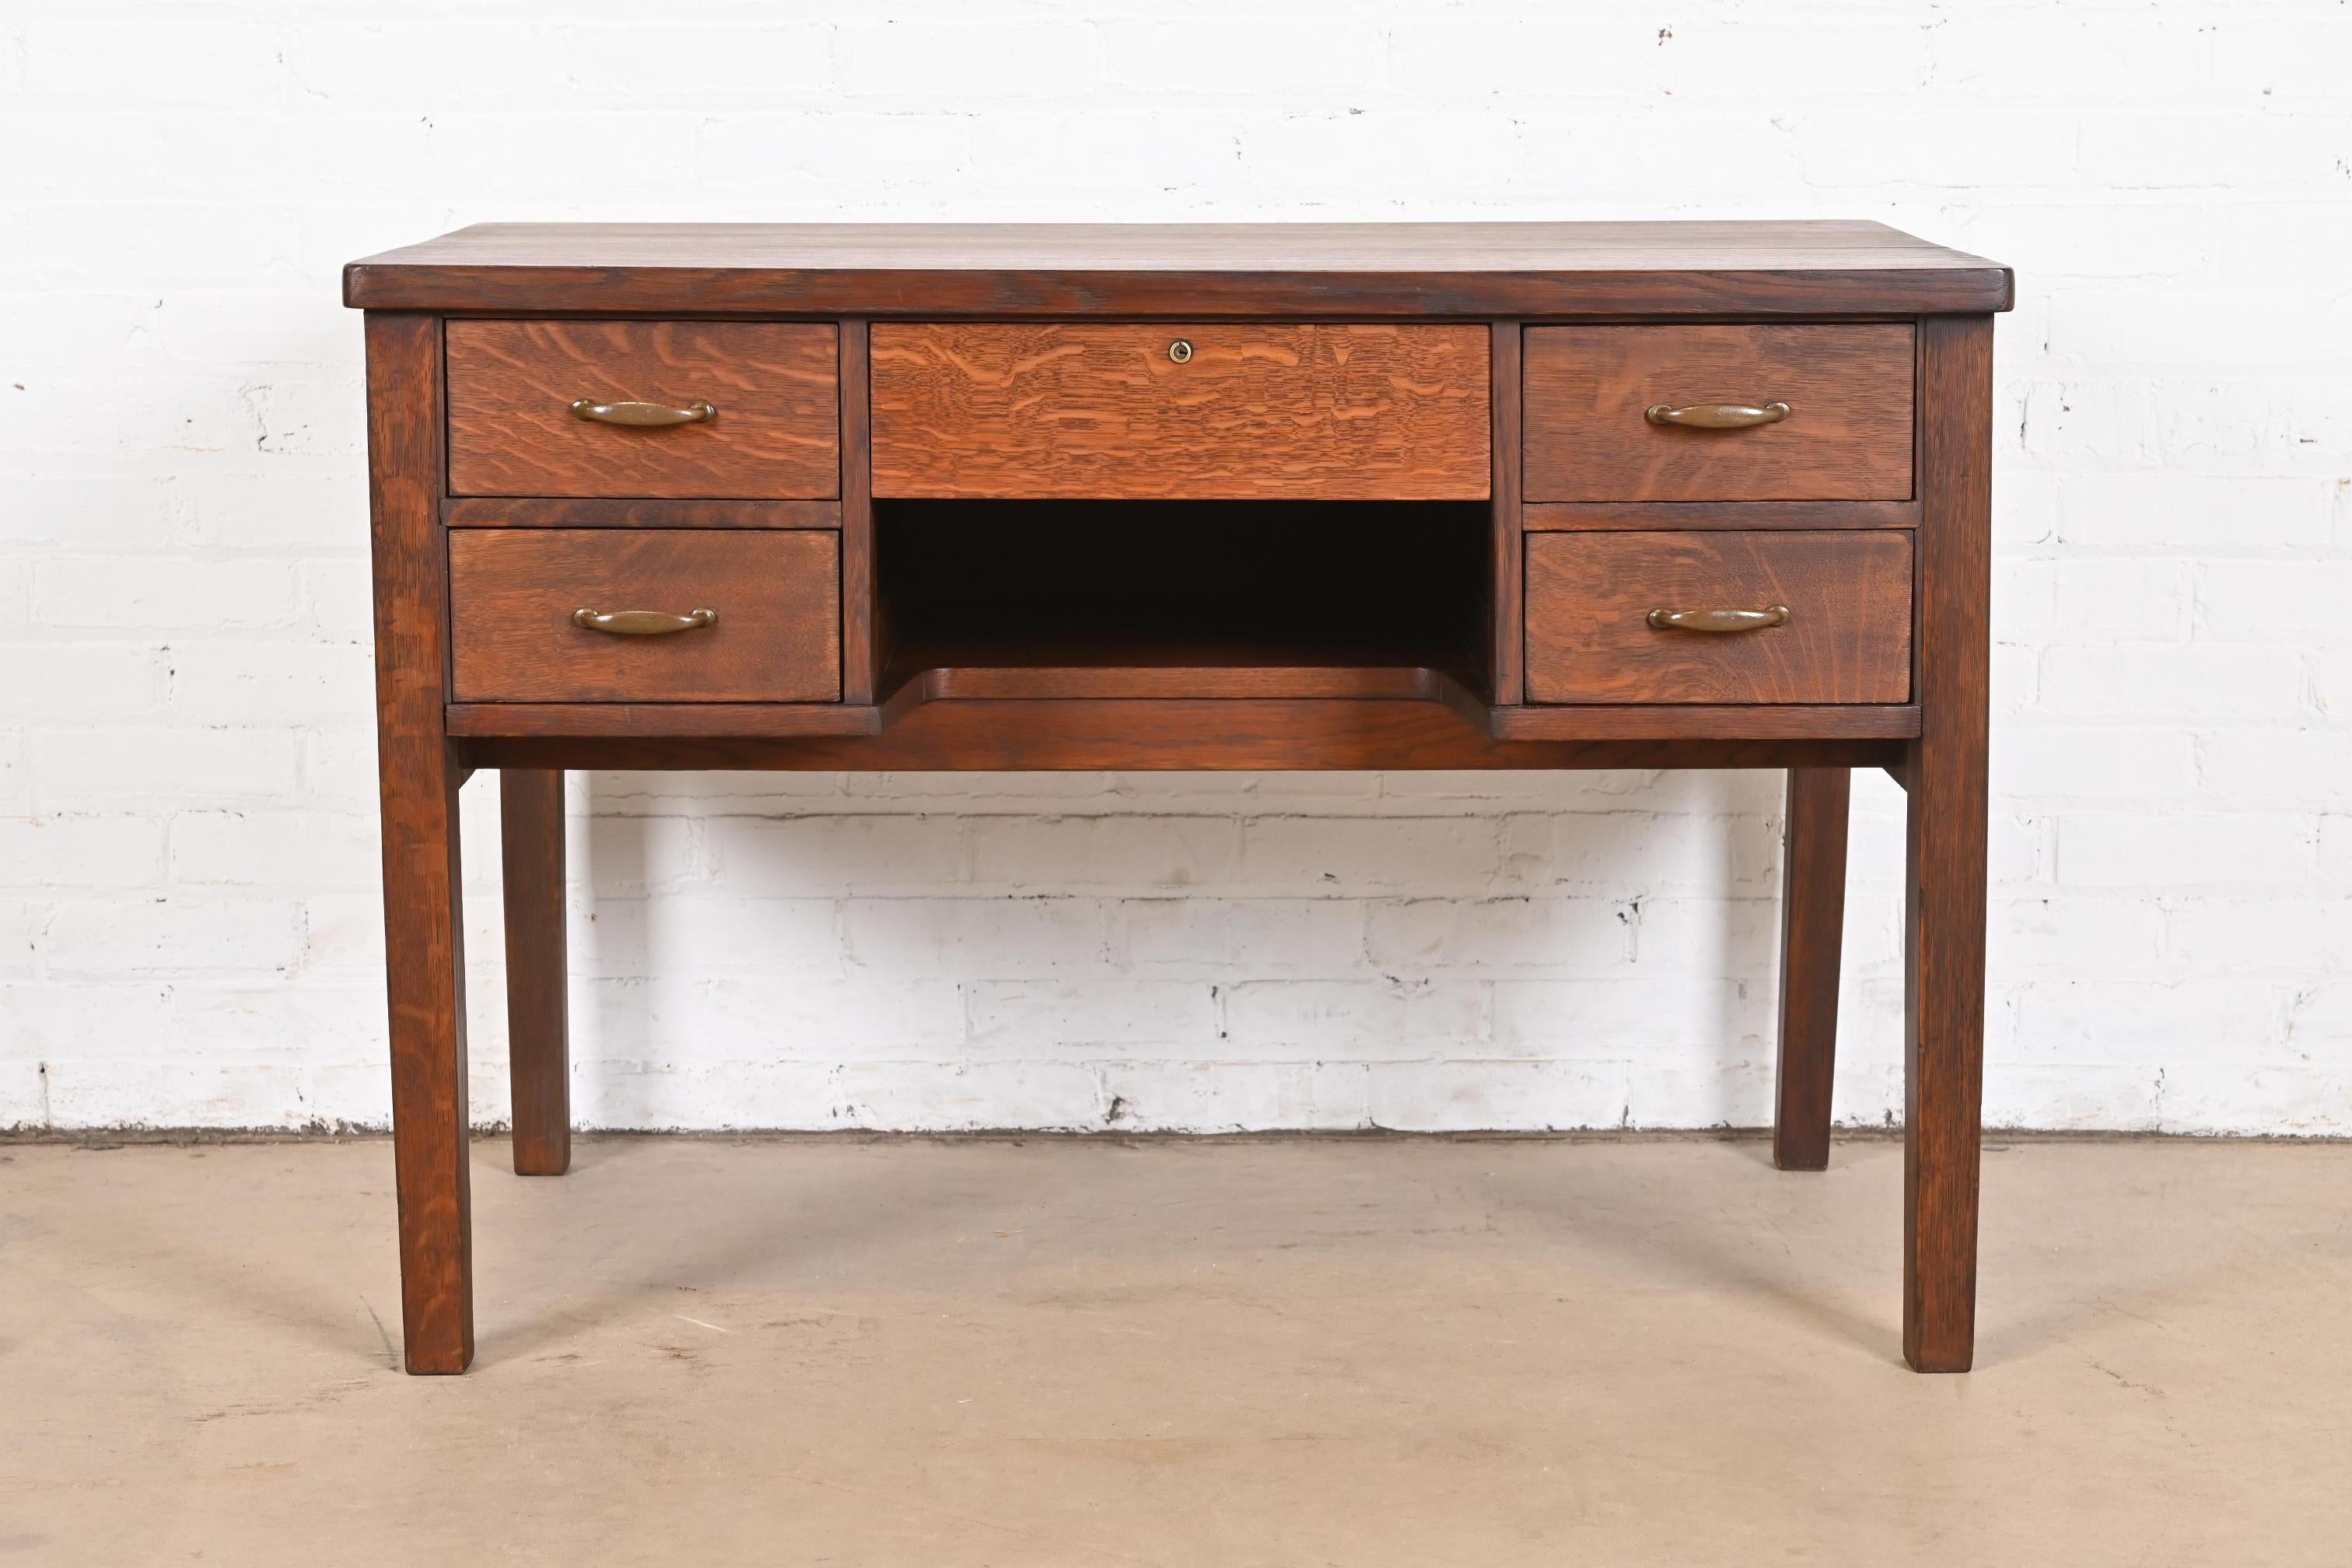 A rare and exceptional antique Mission or Arts & Crafts writing desk

By Gustav Stickley (original label present)

USA, Early 20th Century

Solid quarter sawn oak, with original copper hardware.

Measures: 42